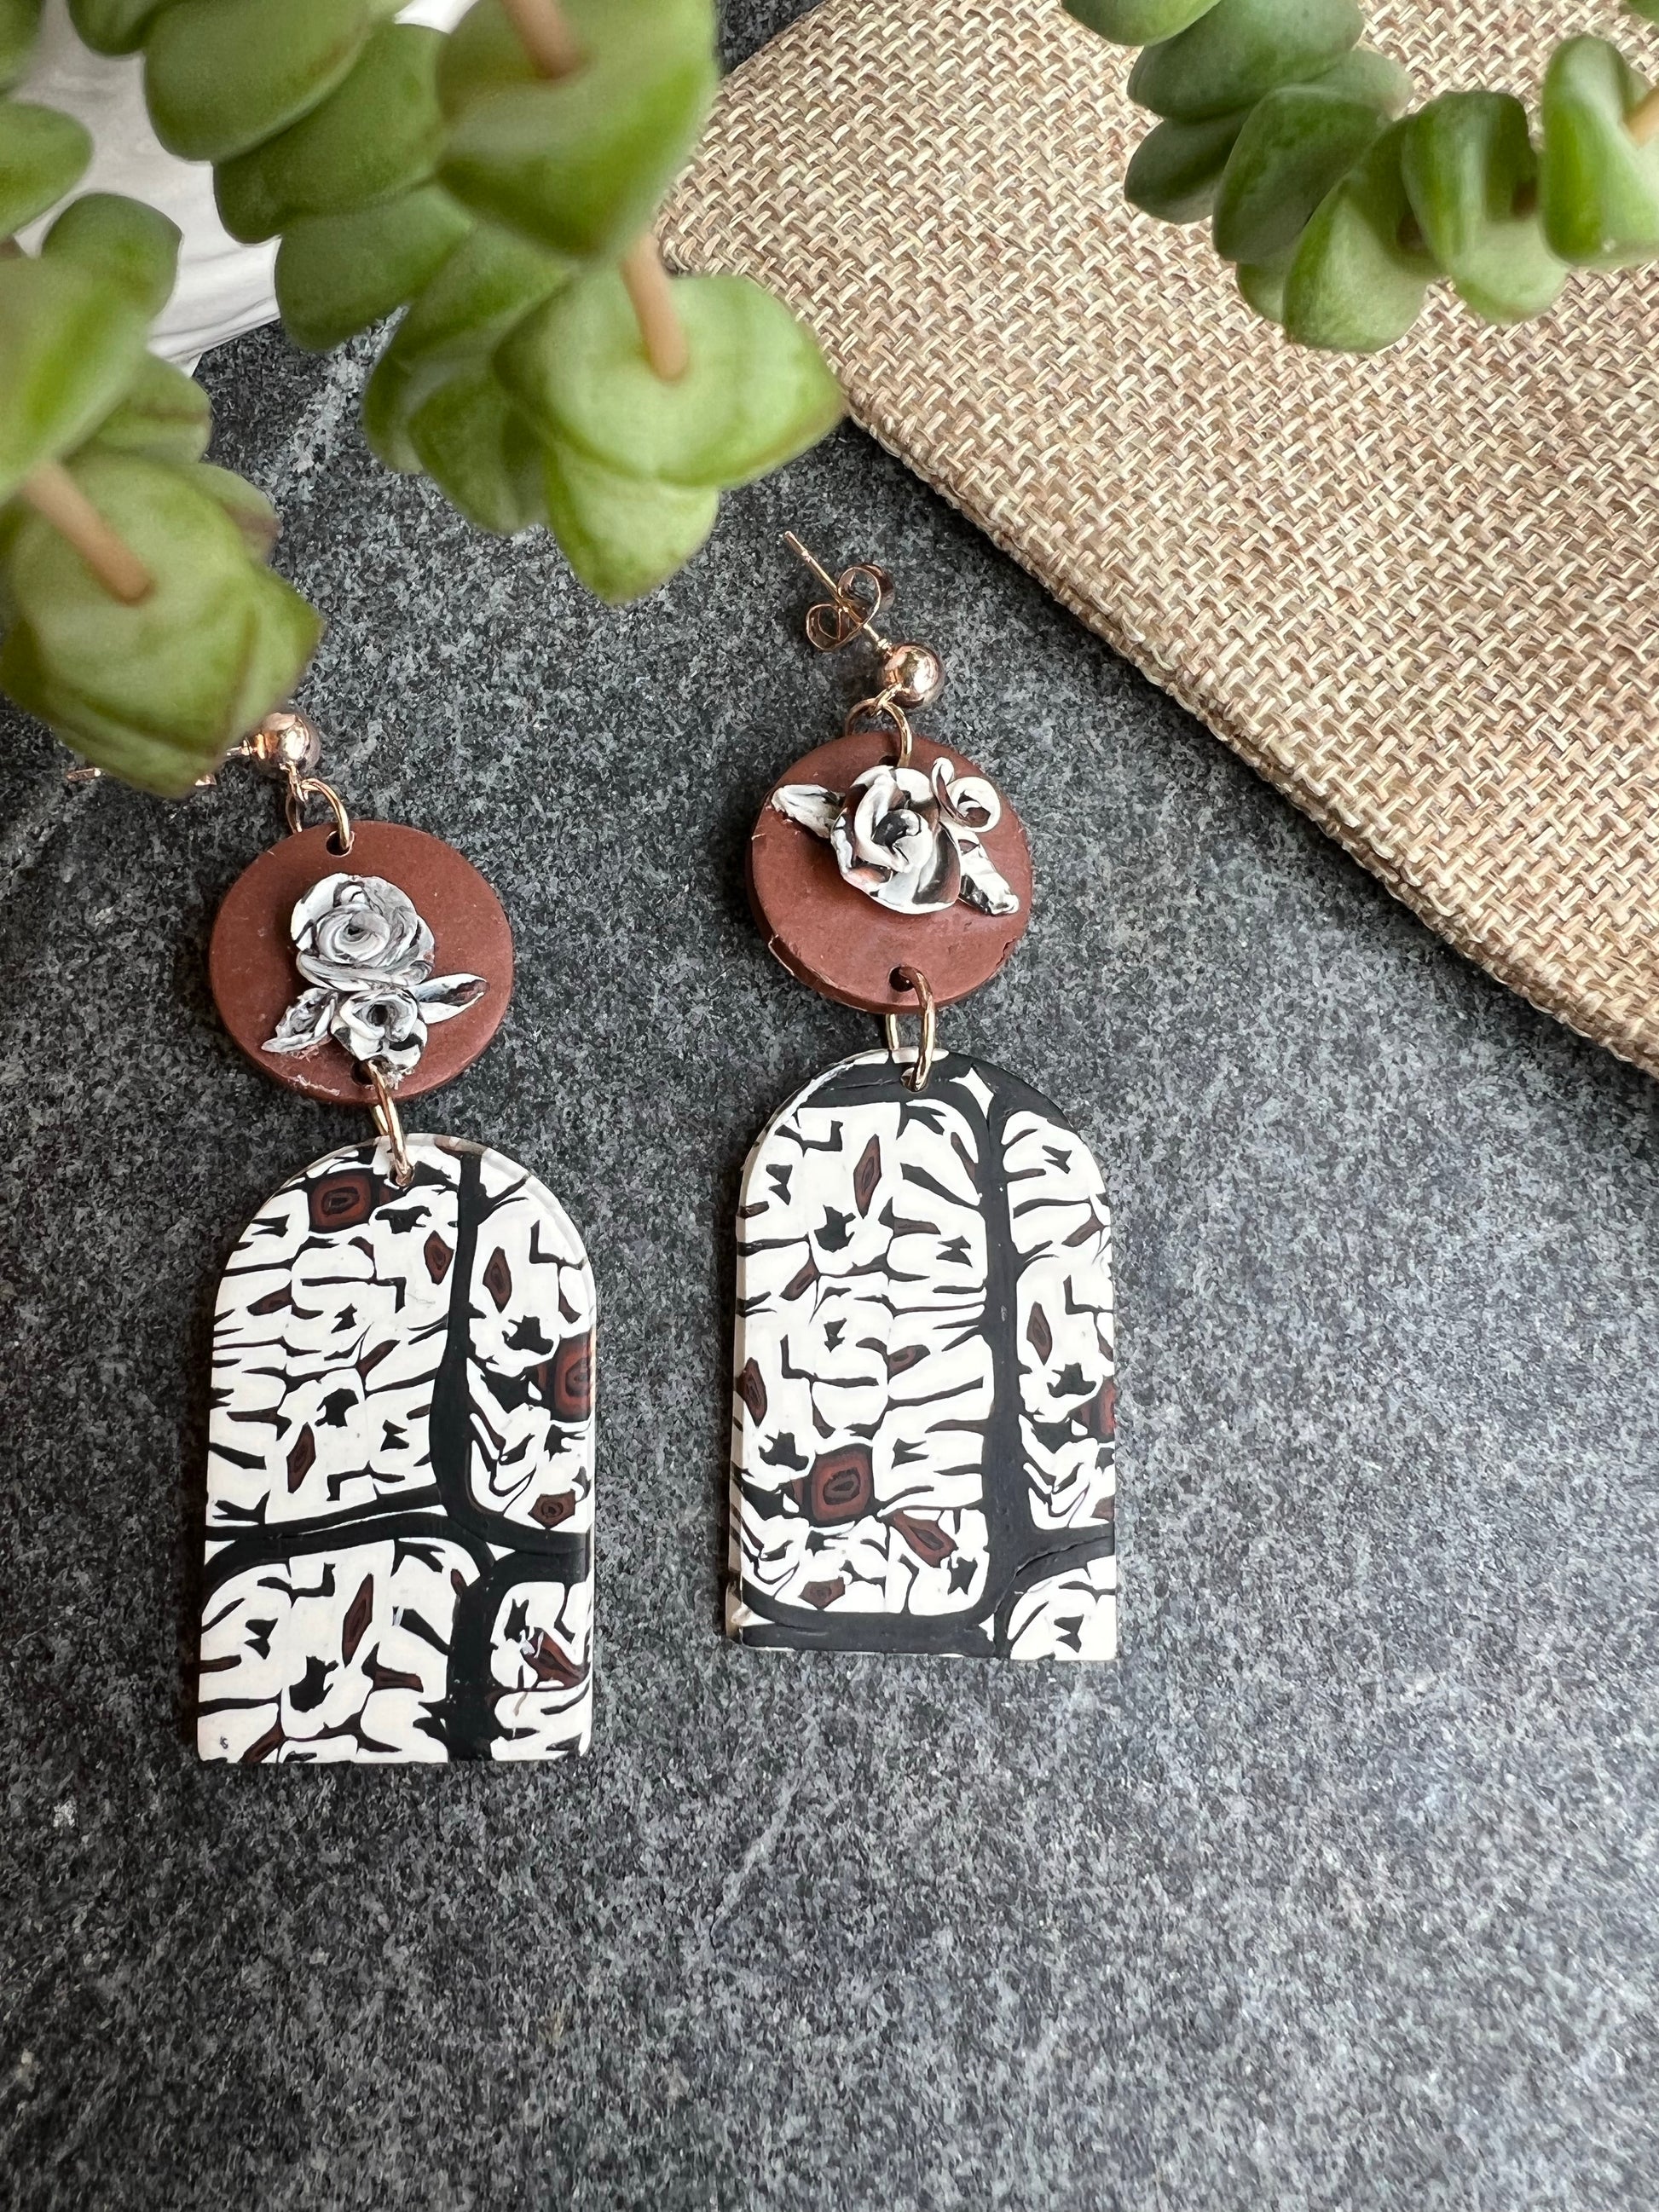 Complete our look with our Colorado Aspen inspired polymer clay earrings, featuring hand-sculpted roses. These intricately crafted accessories embody the resilience of Aspen trees, while the delicate roses add a touch of elegance.